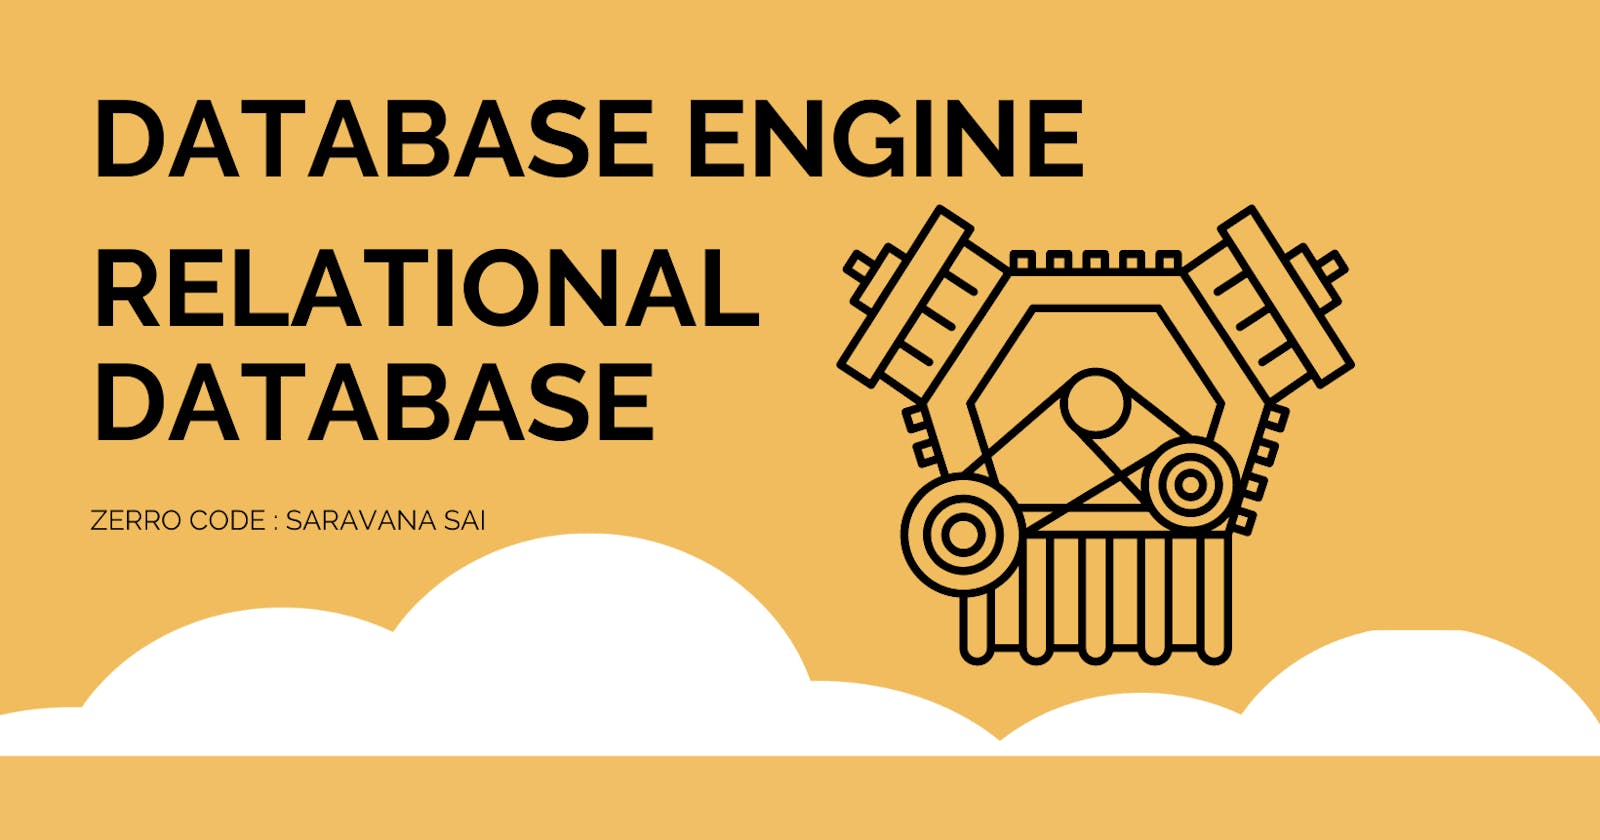 Do you know what is Database engine in  Relational database